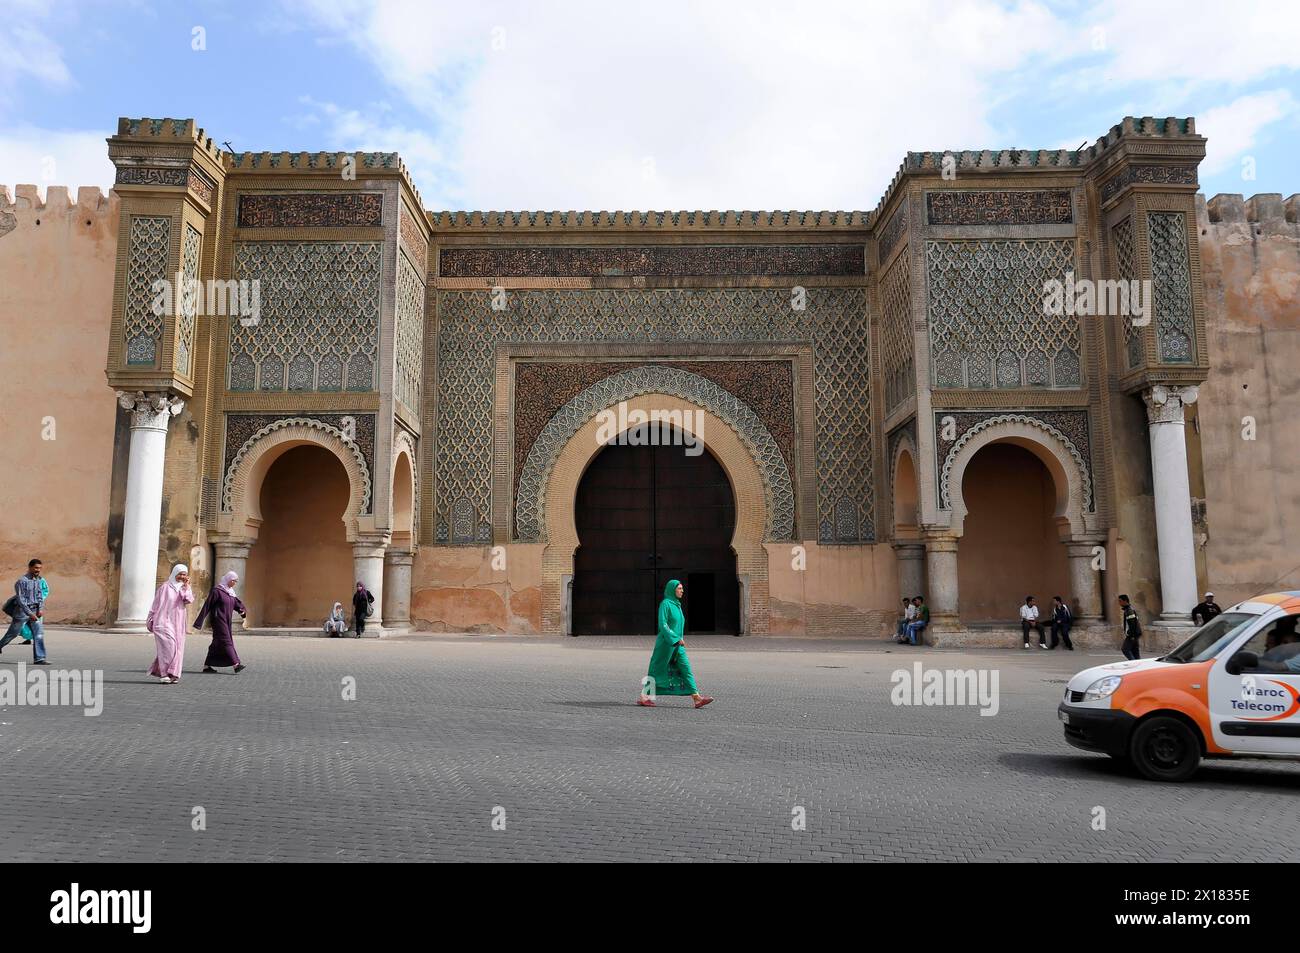 Bab Mansour city gate, Meknes, View of the Bab Mansour gate in Meknes with passers-by and clear sky, Northern Morocco, Morocco Stock Photo